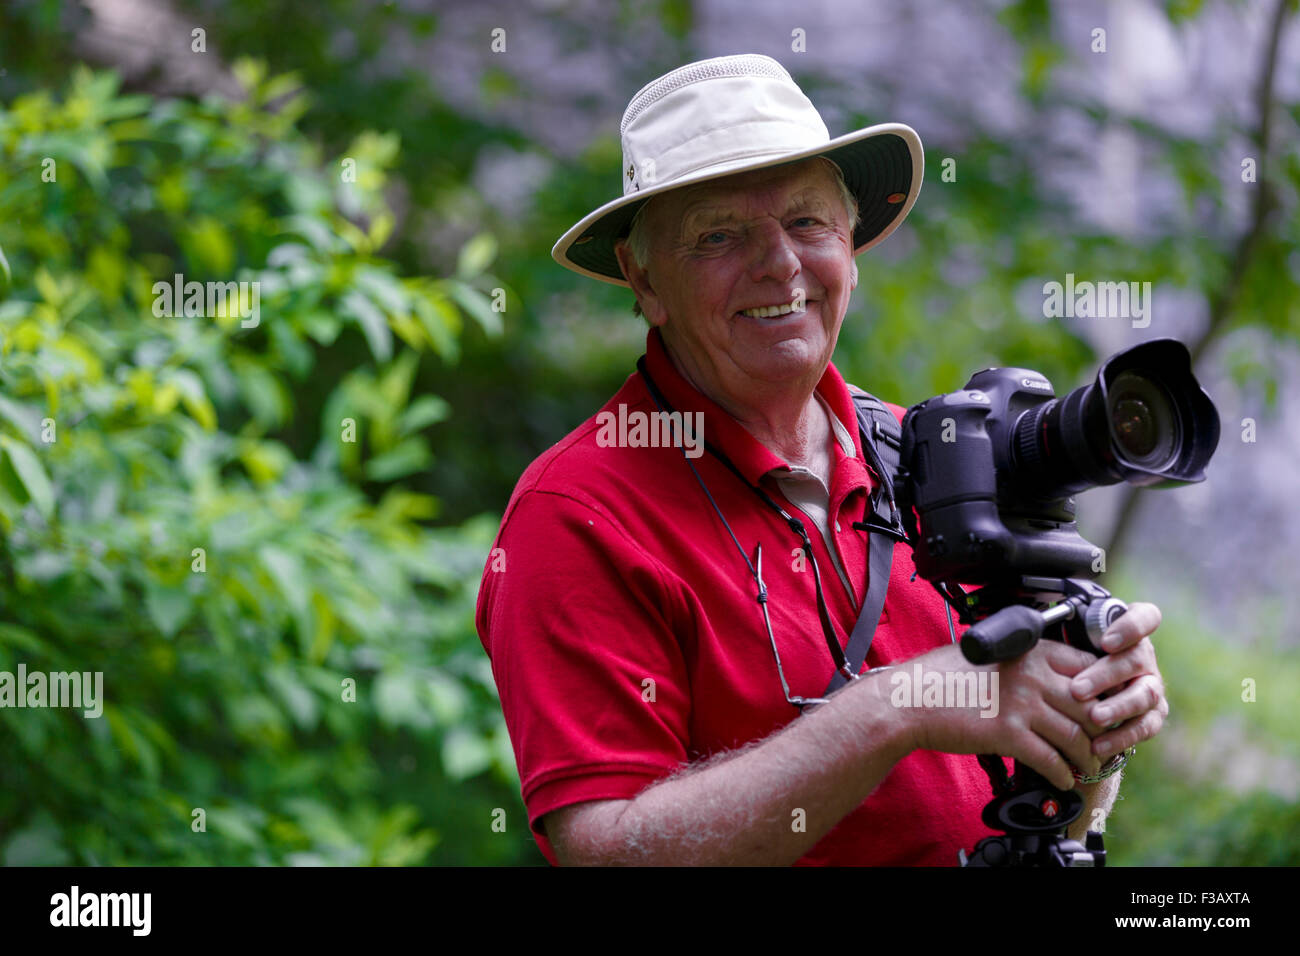 Smiling senior male wearing Tilley Hat holding camera smiling at photographer blurred foliage background Stock Photo